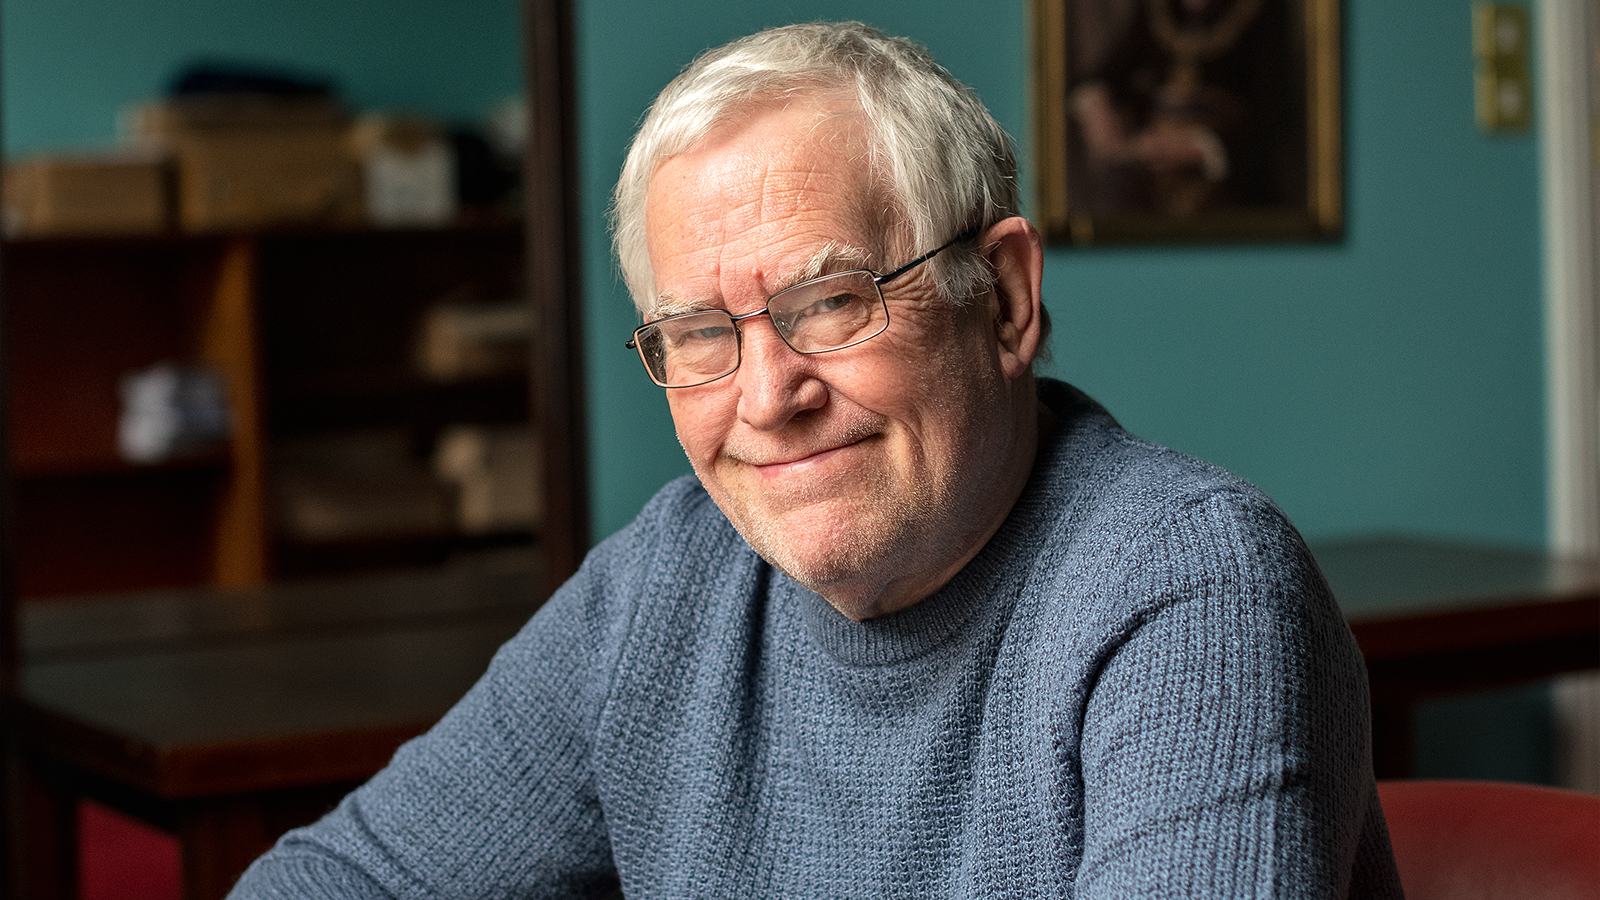 Gary is pictured with a blue knitted jumper, he is wearing rectangular glasses with a thing metal frame and is looking at the camera and smiling.